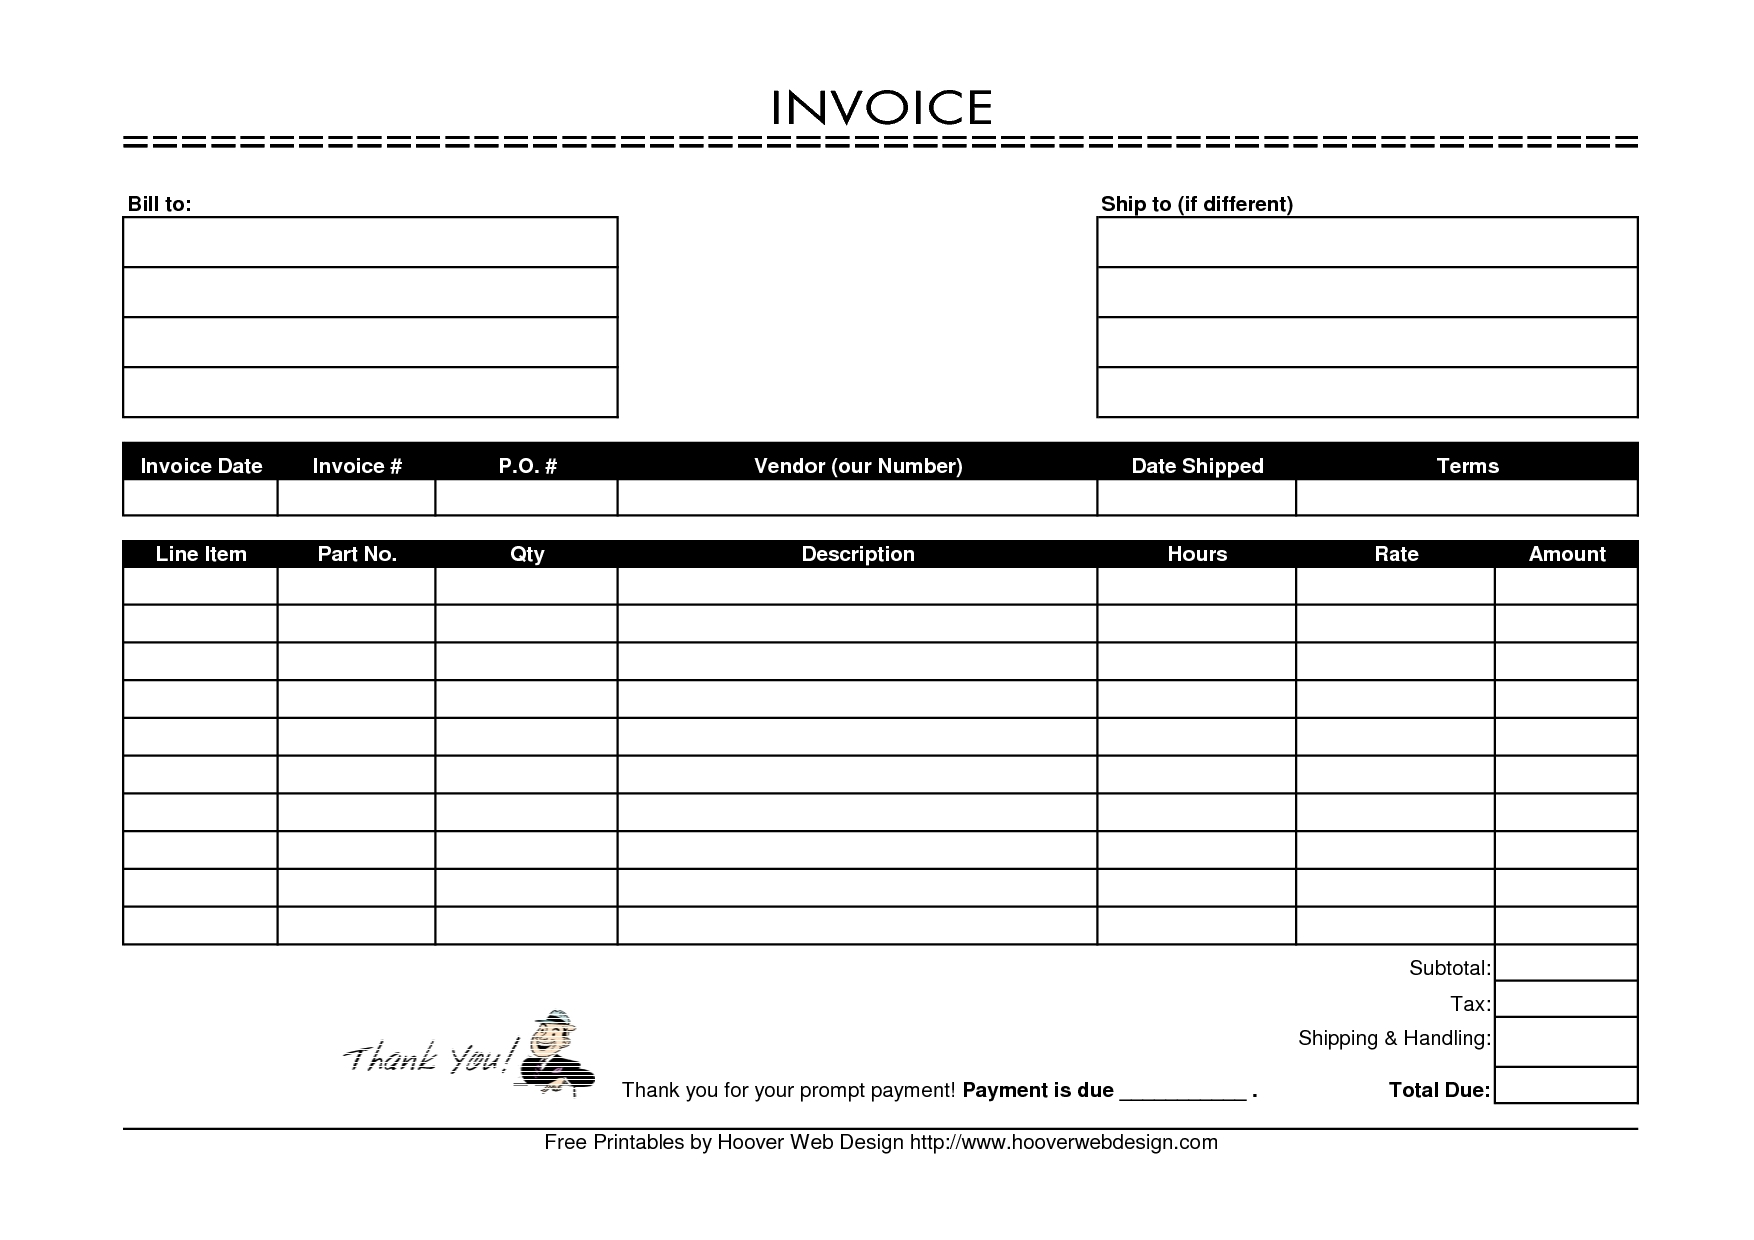 free printable invoice template 9 examples of printable invoice free printable invoices download